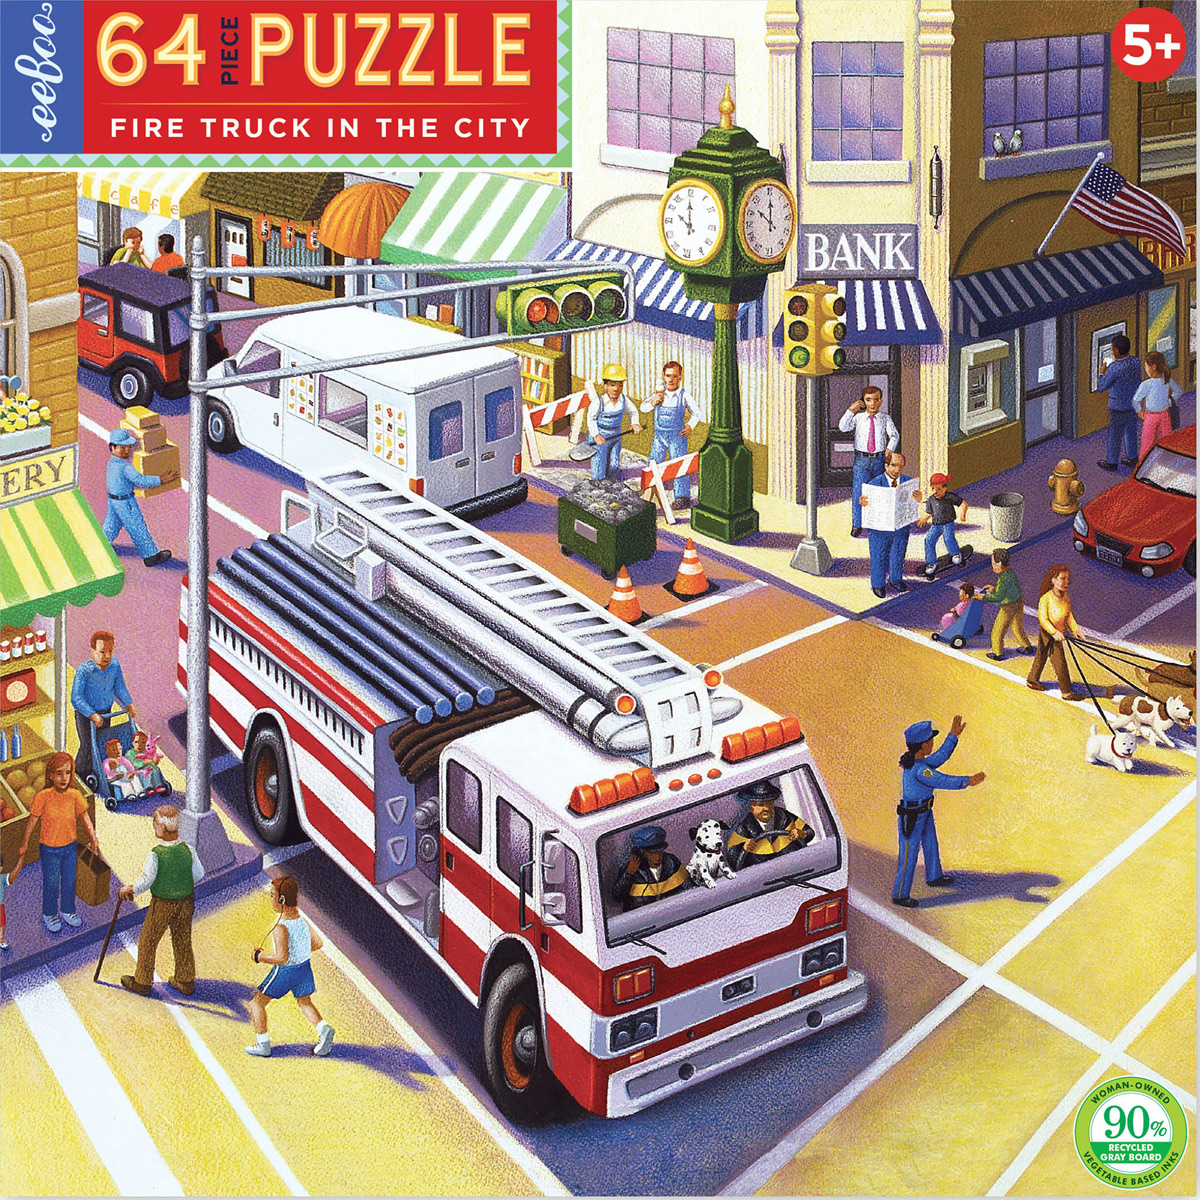 Fire Truck in the City Vehicles Jigsaw Puzzle